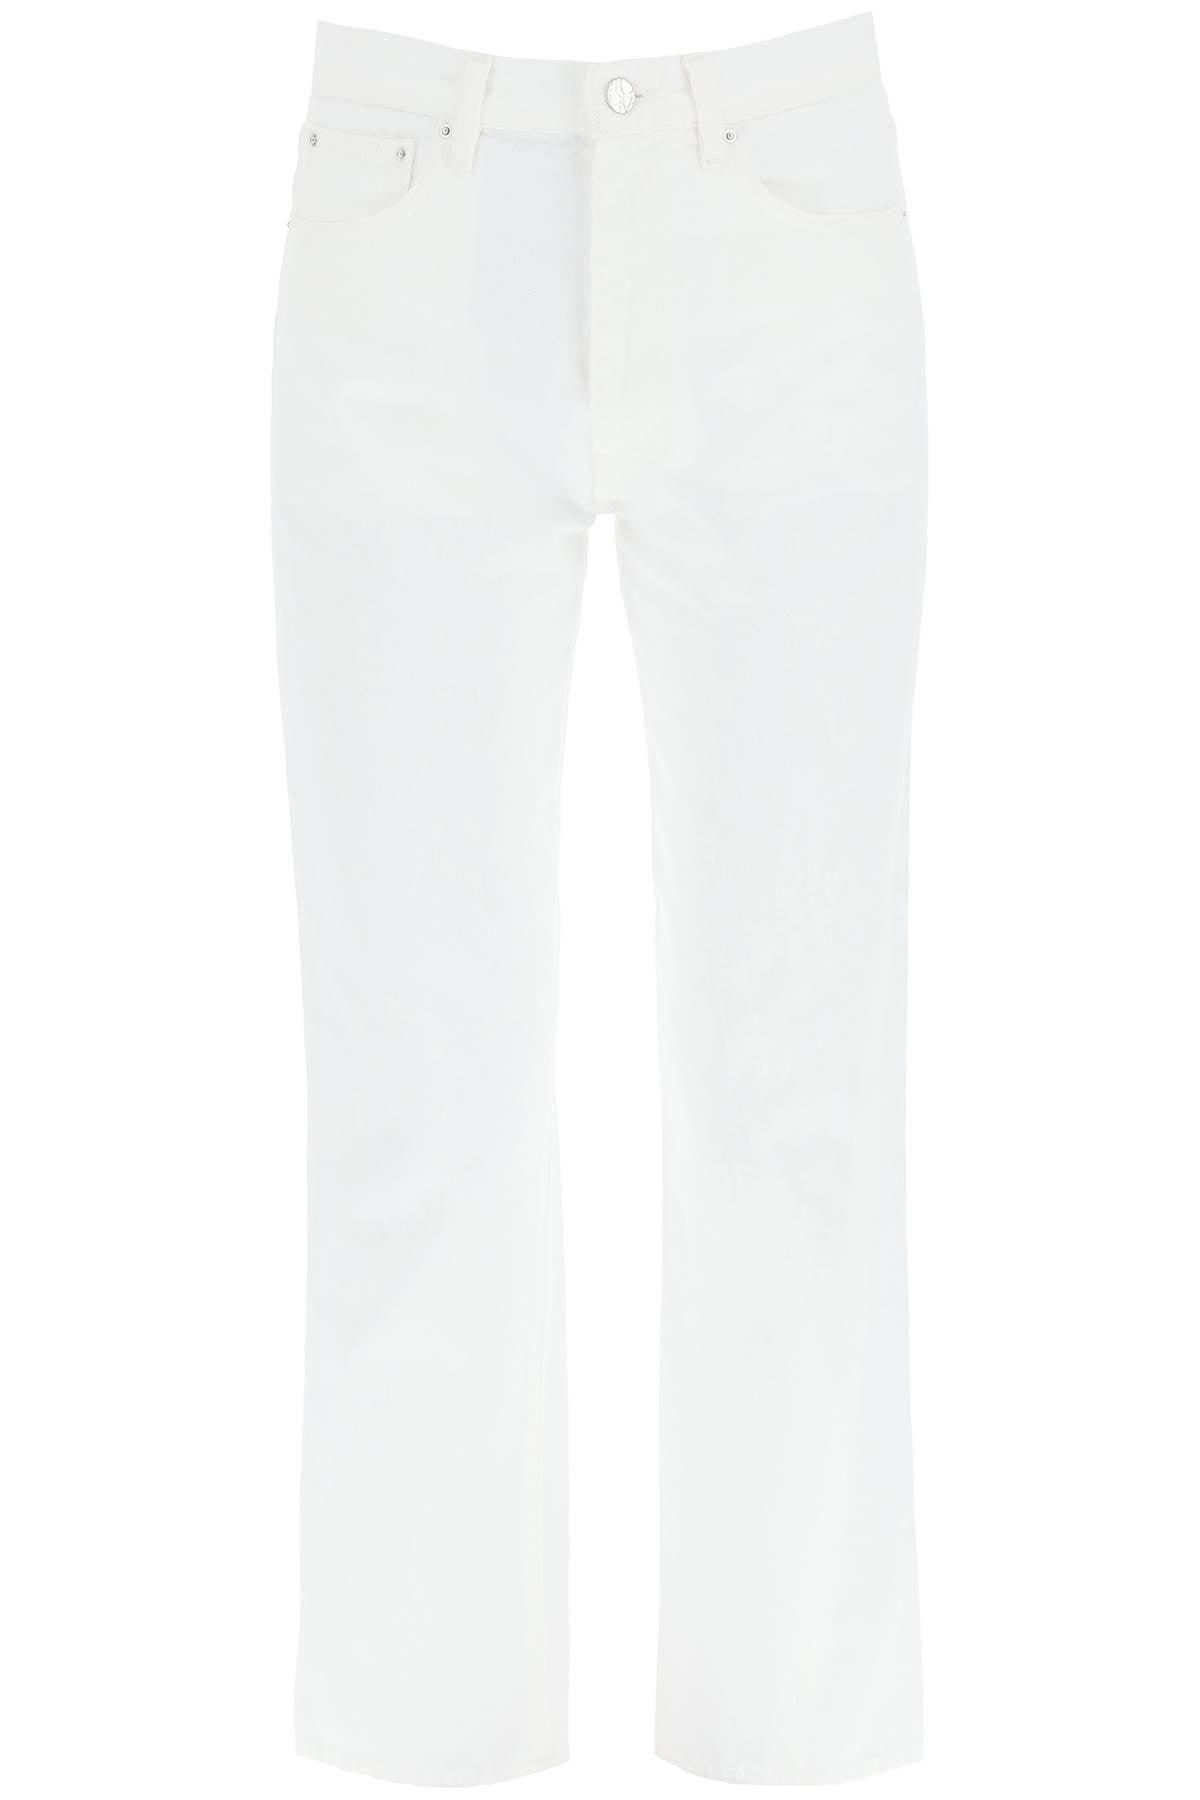 Totême Twisted Seam Denim Jeans in White Womens Clothing Jeans Straight-leg jeans 